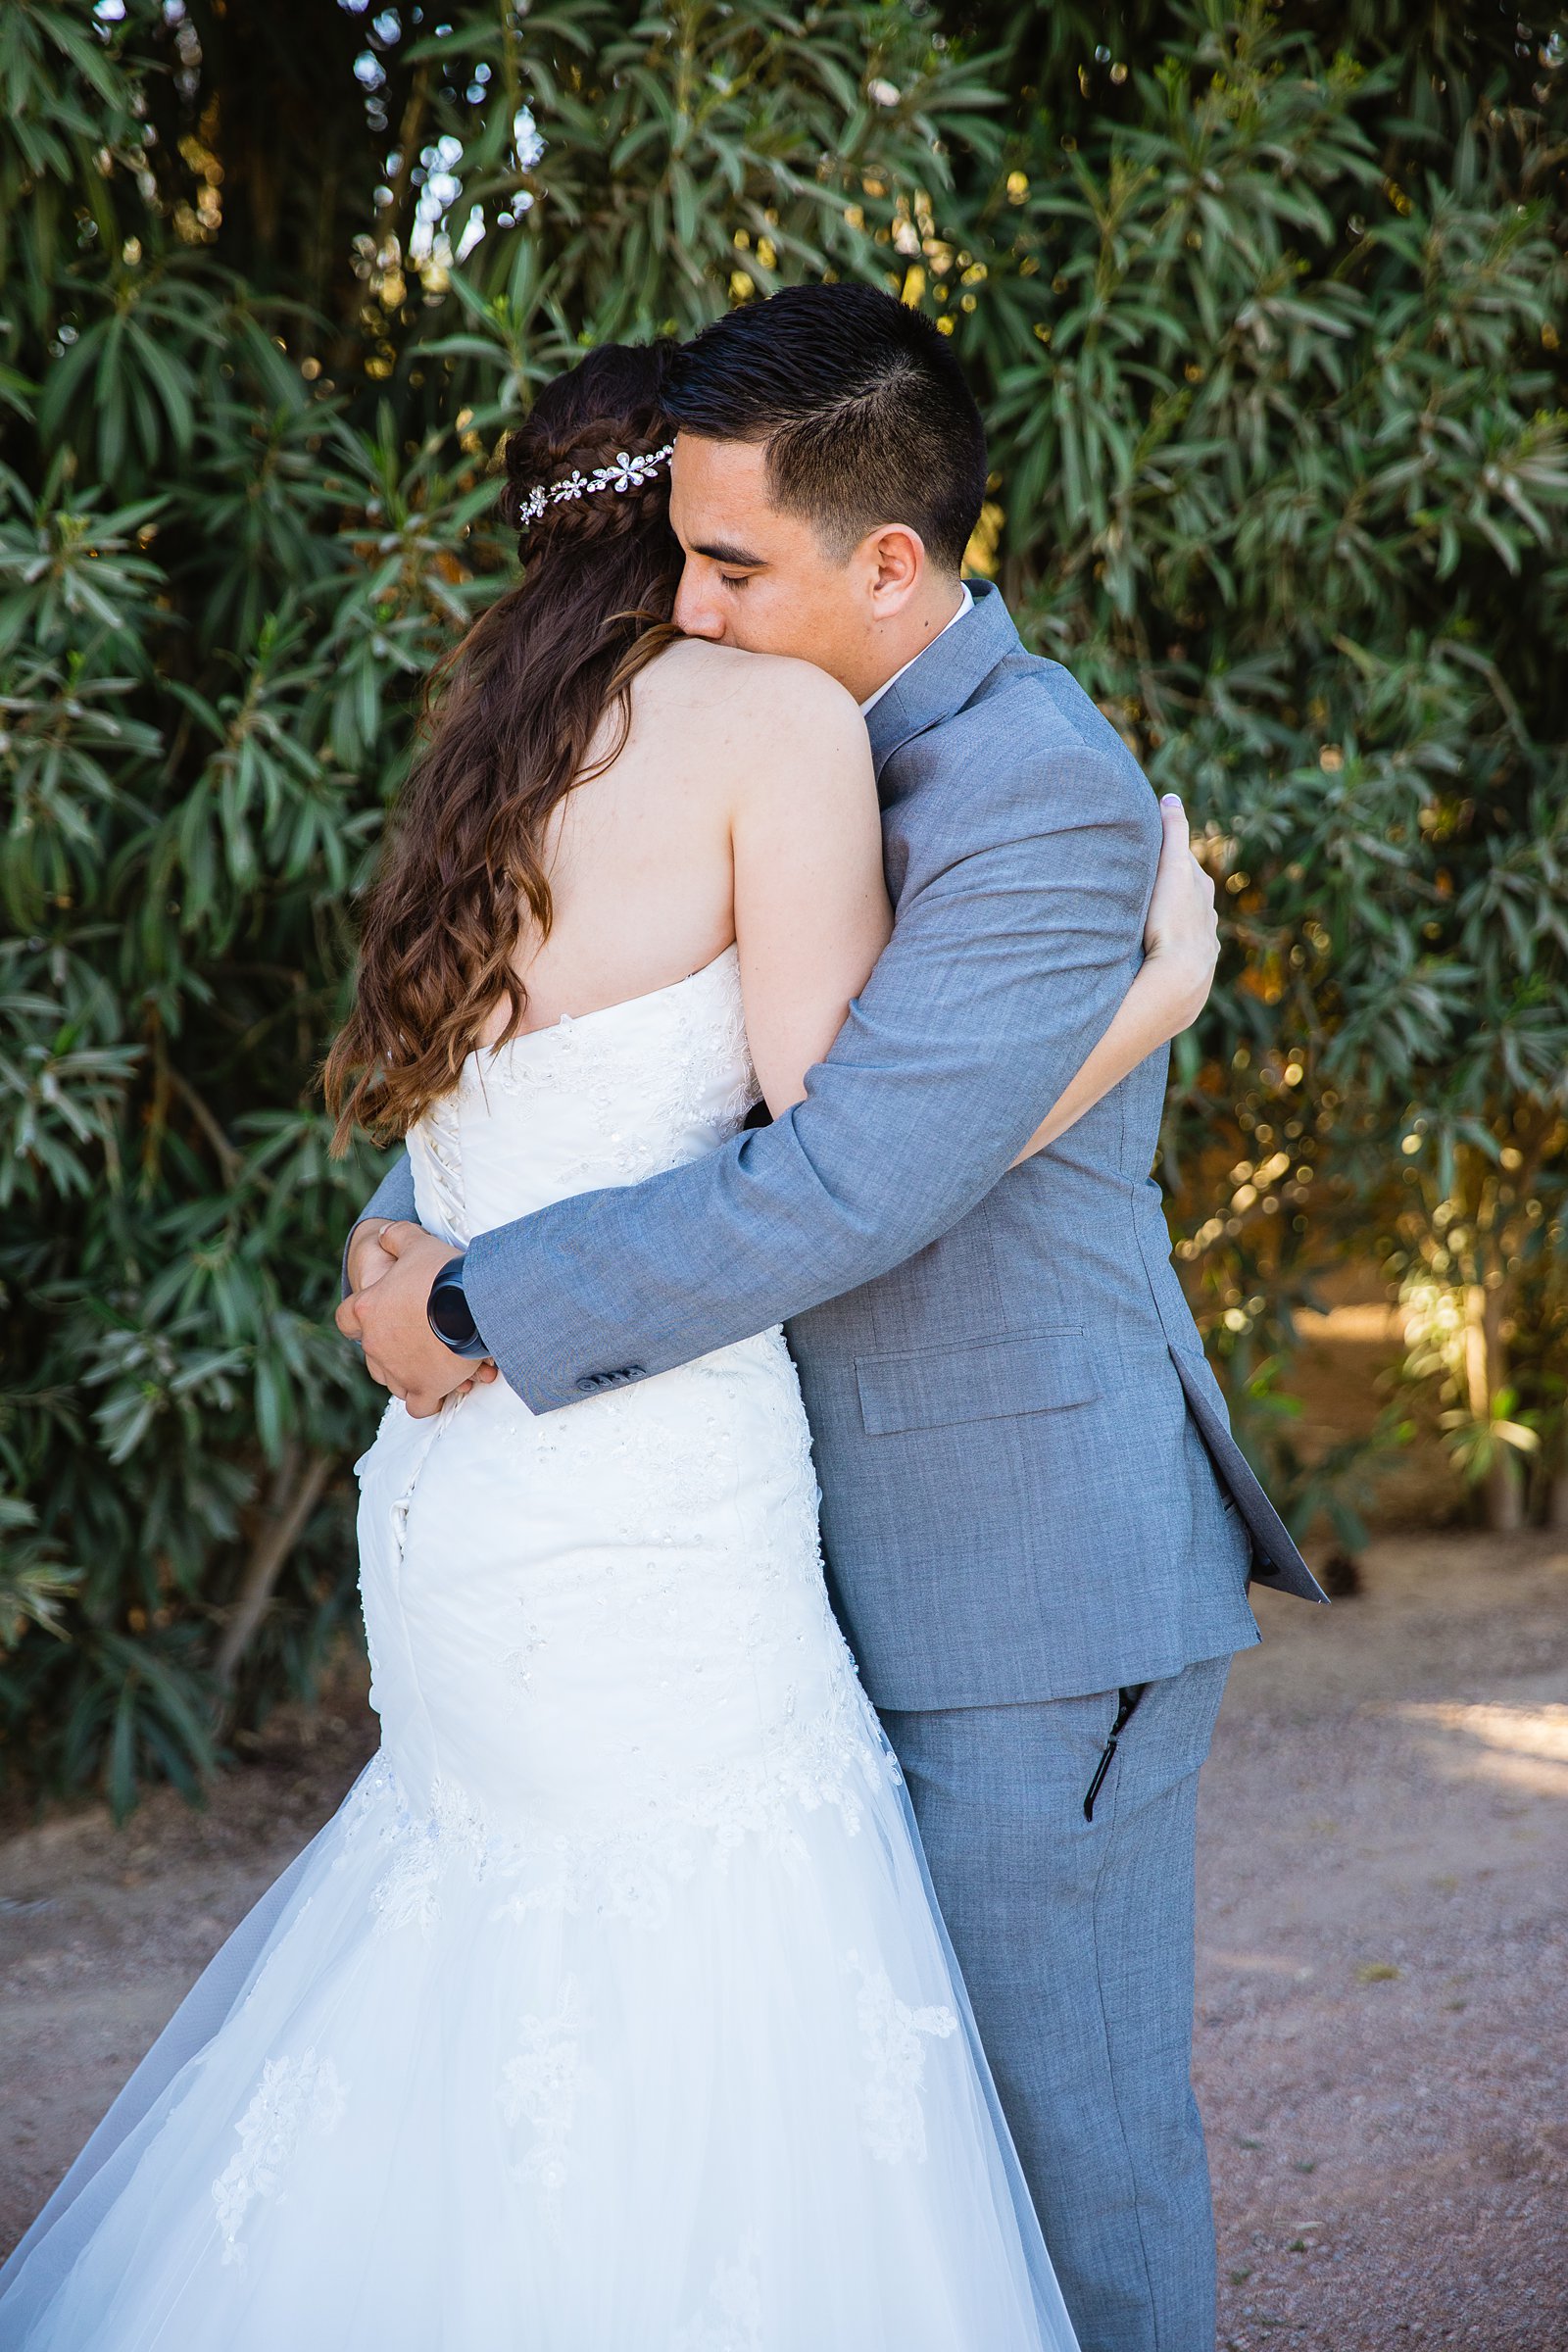 Bride and groom share an intimate moment during their first look at Schnepf Farms by Arizona wedding photographer PMA Photography.